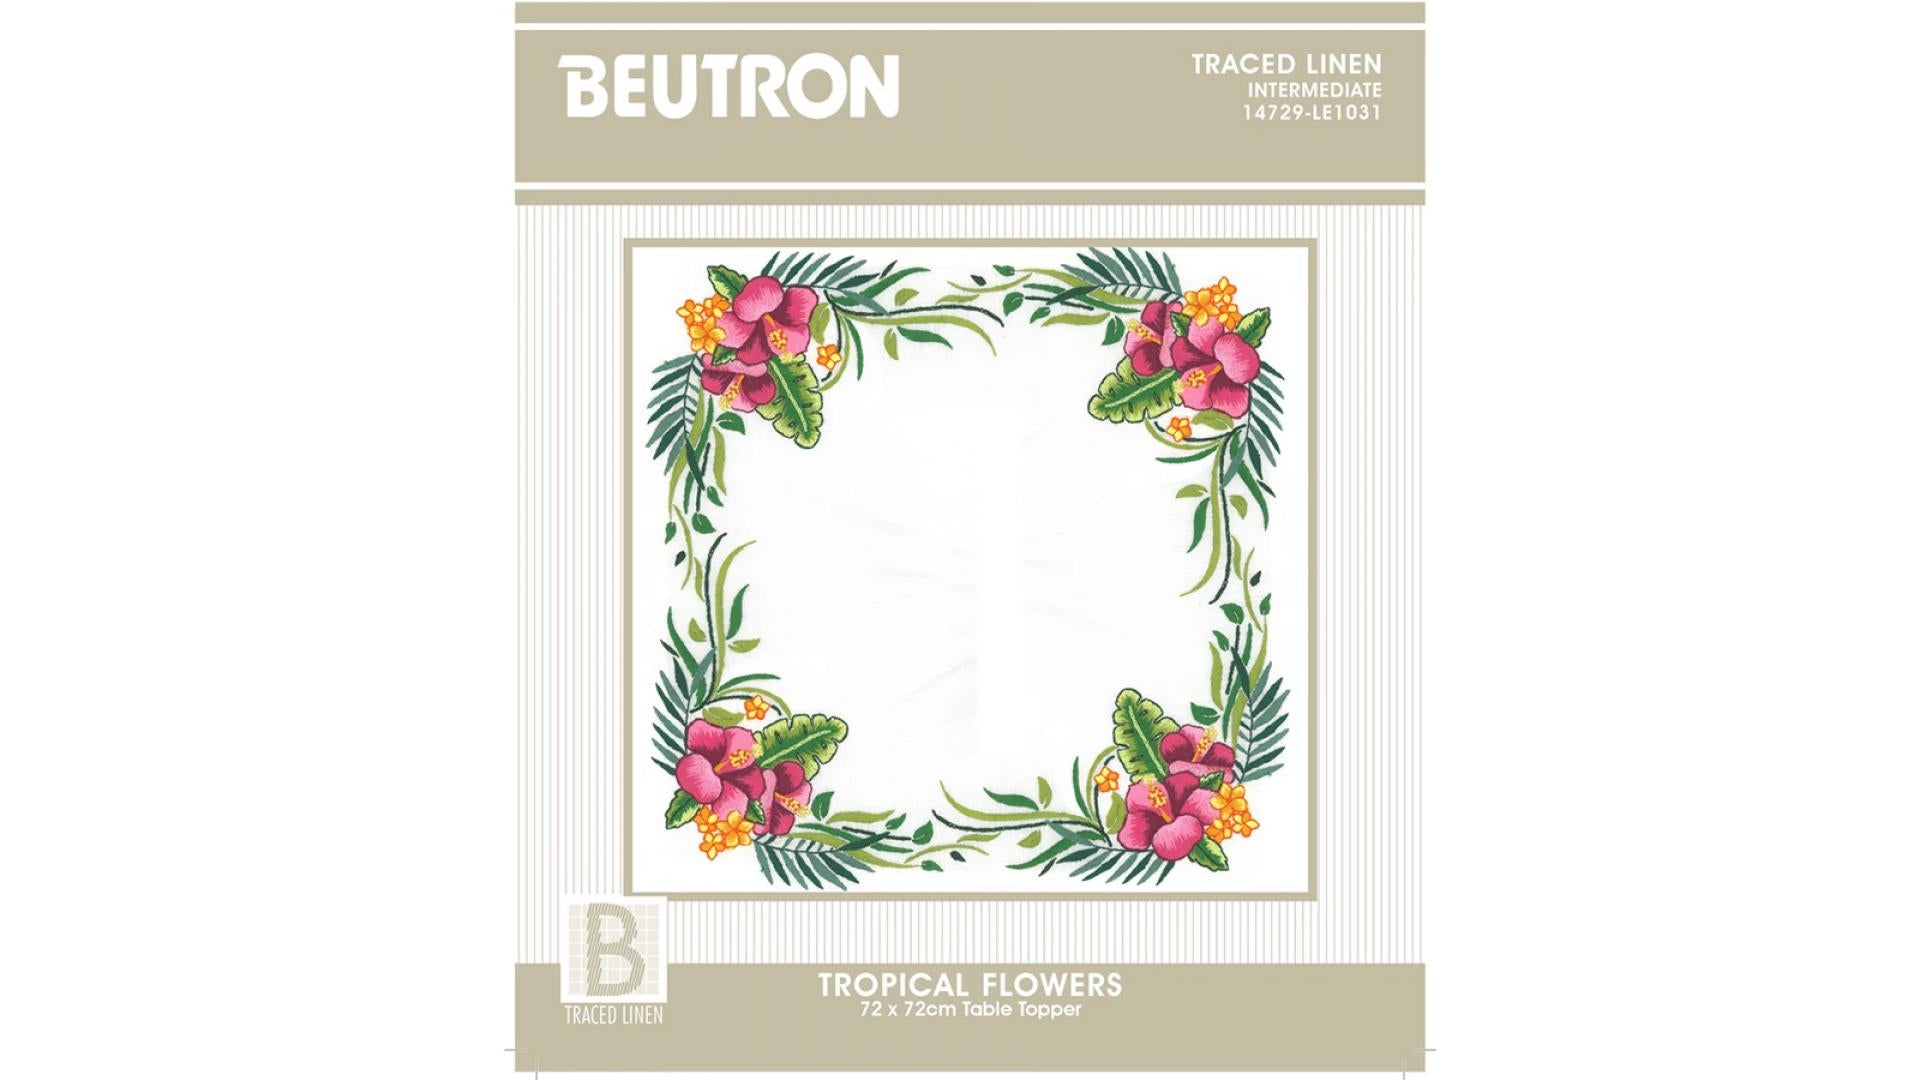 Beutron Table Topper Tropical Flowers - Traced Embroidery Kit